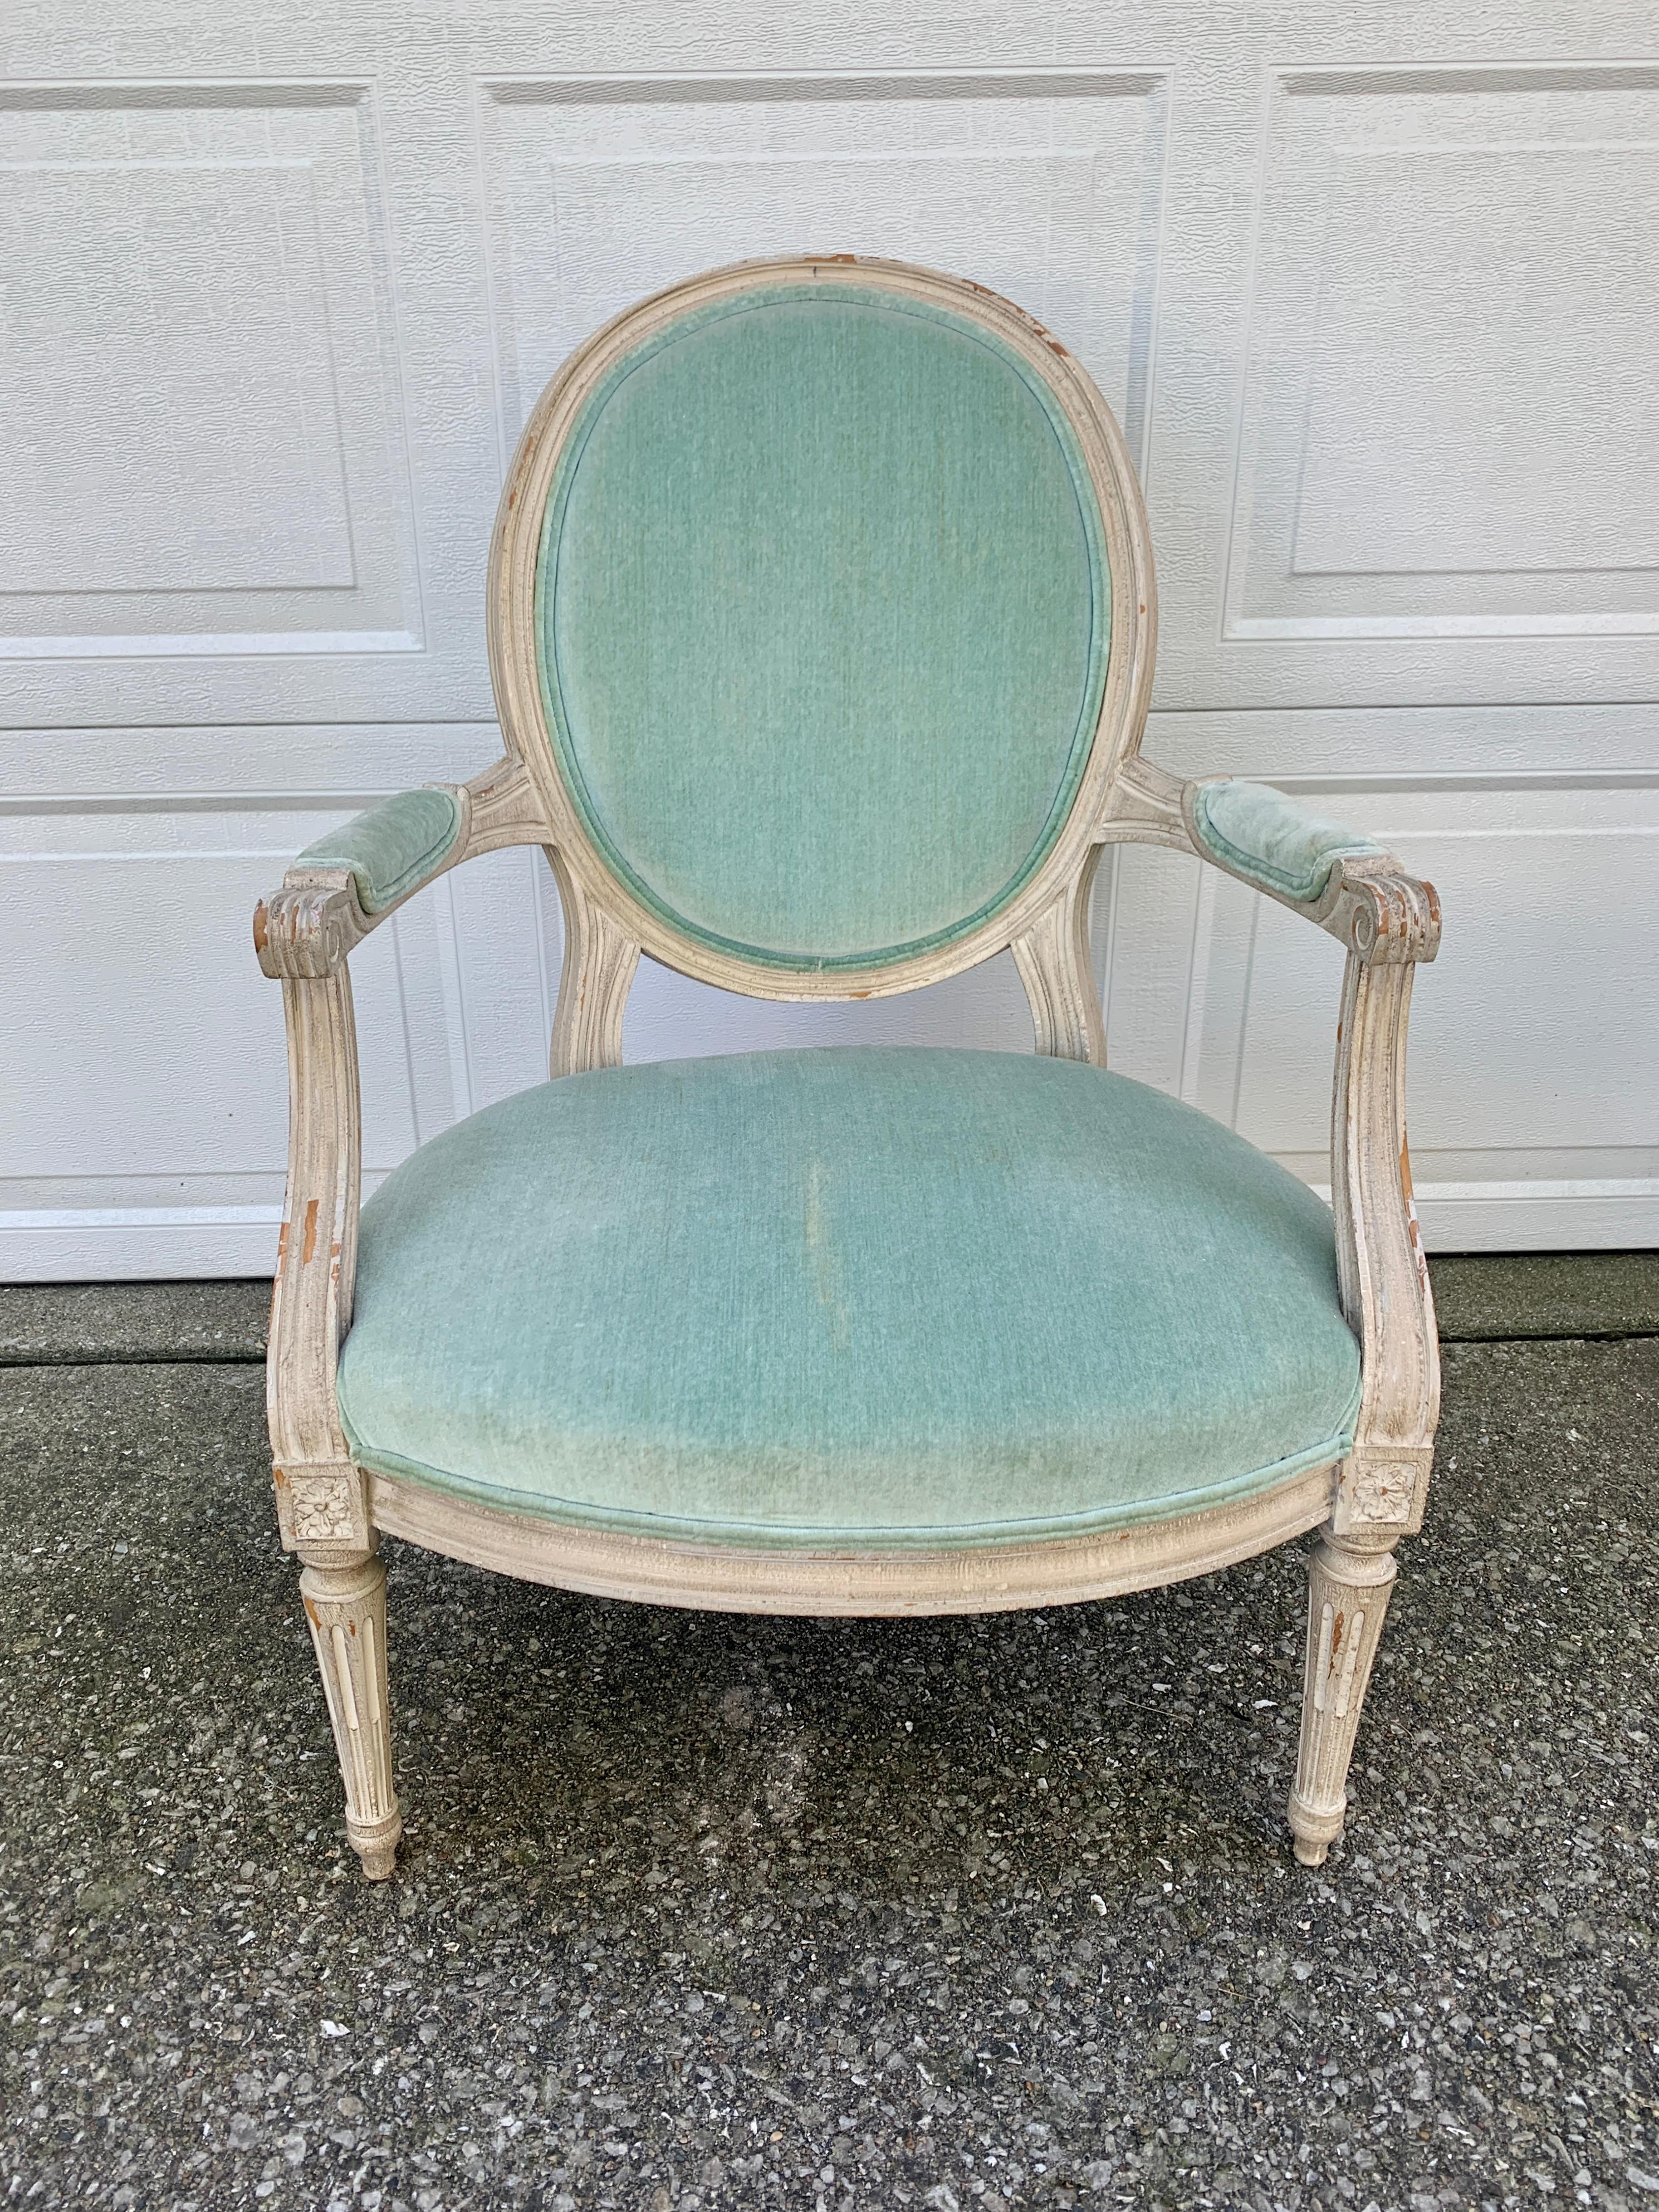 A stunning French Provincial Louis XVI style armchair

France, Circa 1920s

Carved painted wood frame, with light blue velvet upholstery

Measures: 24.5